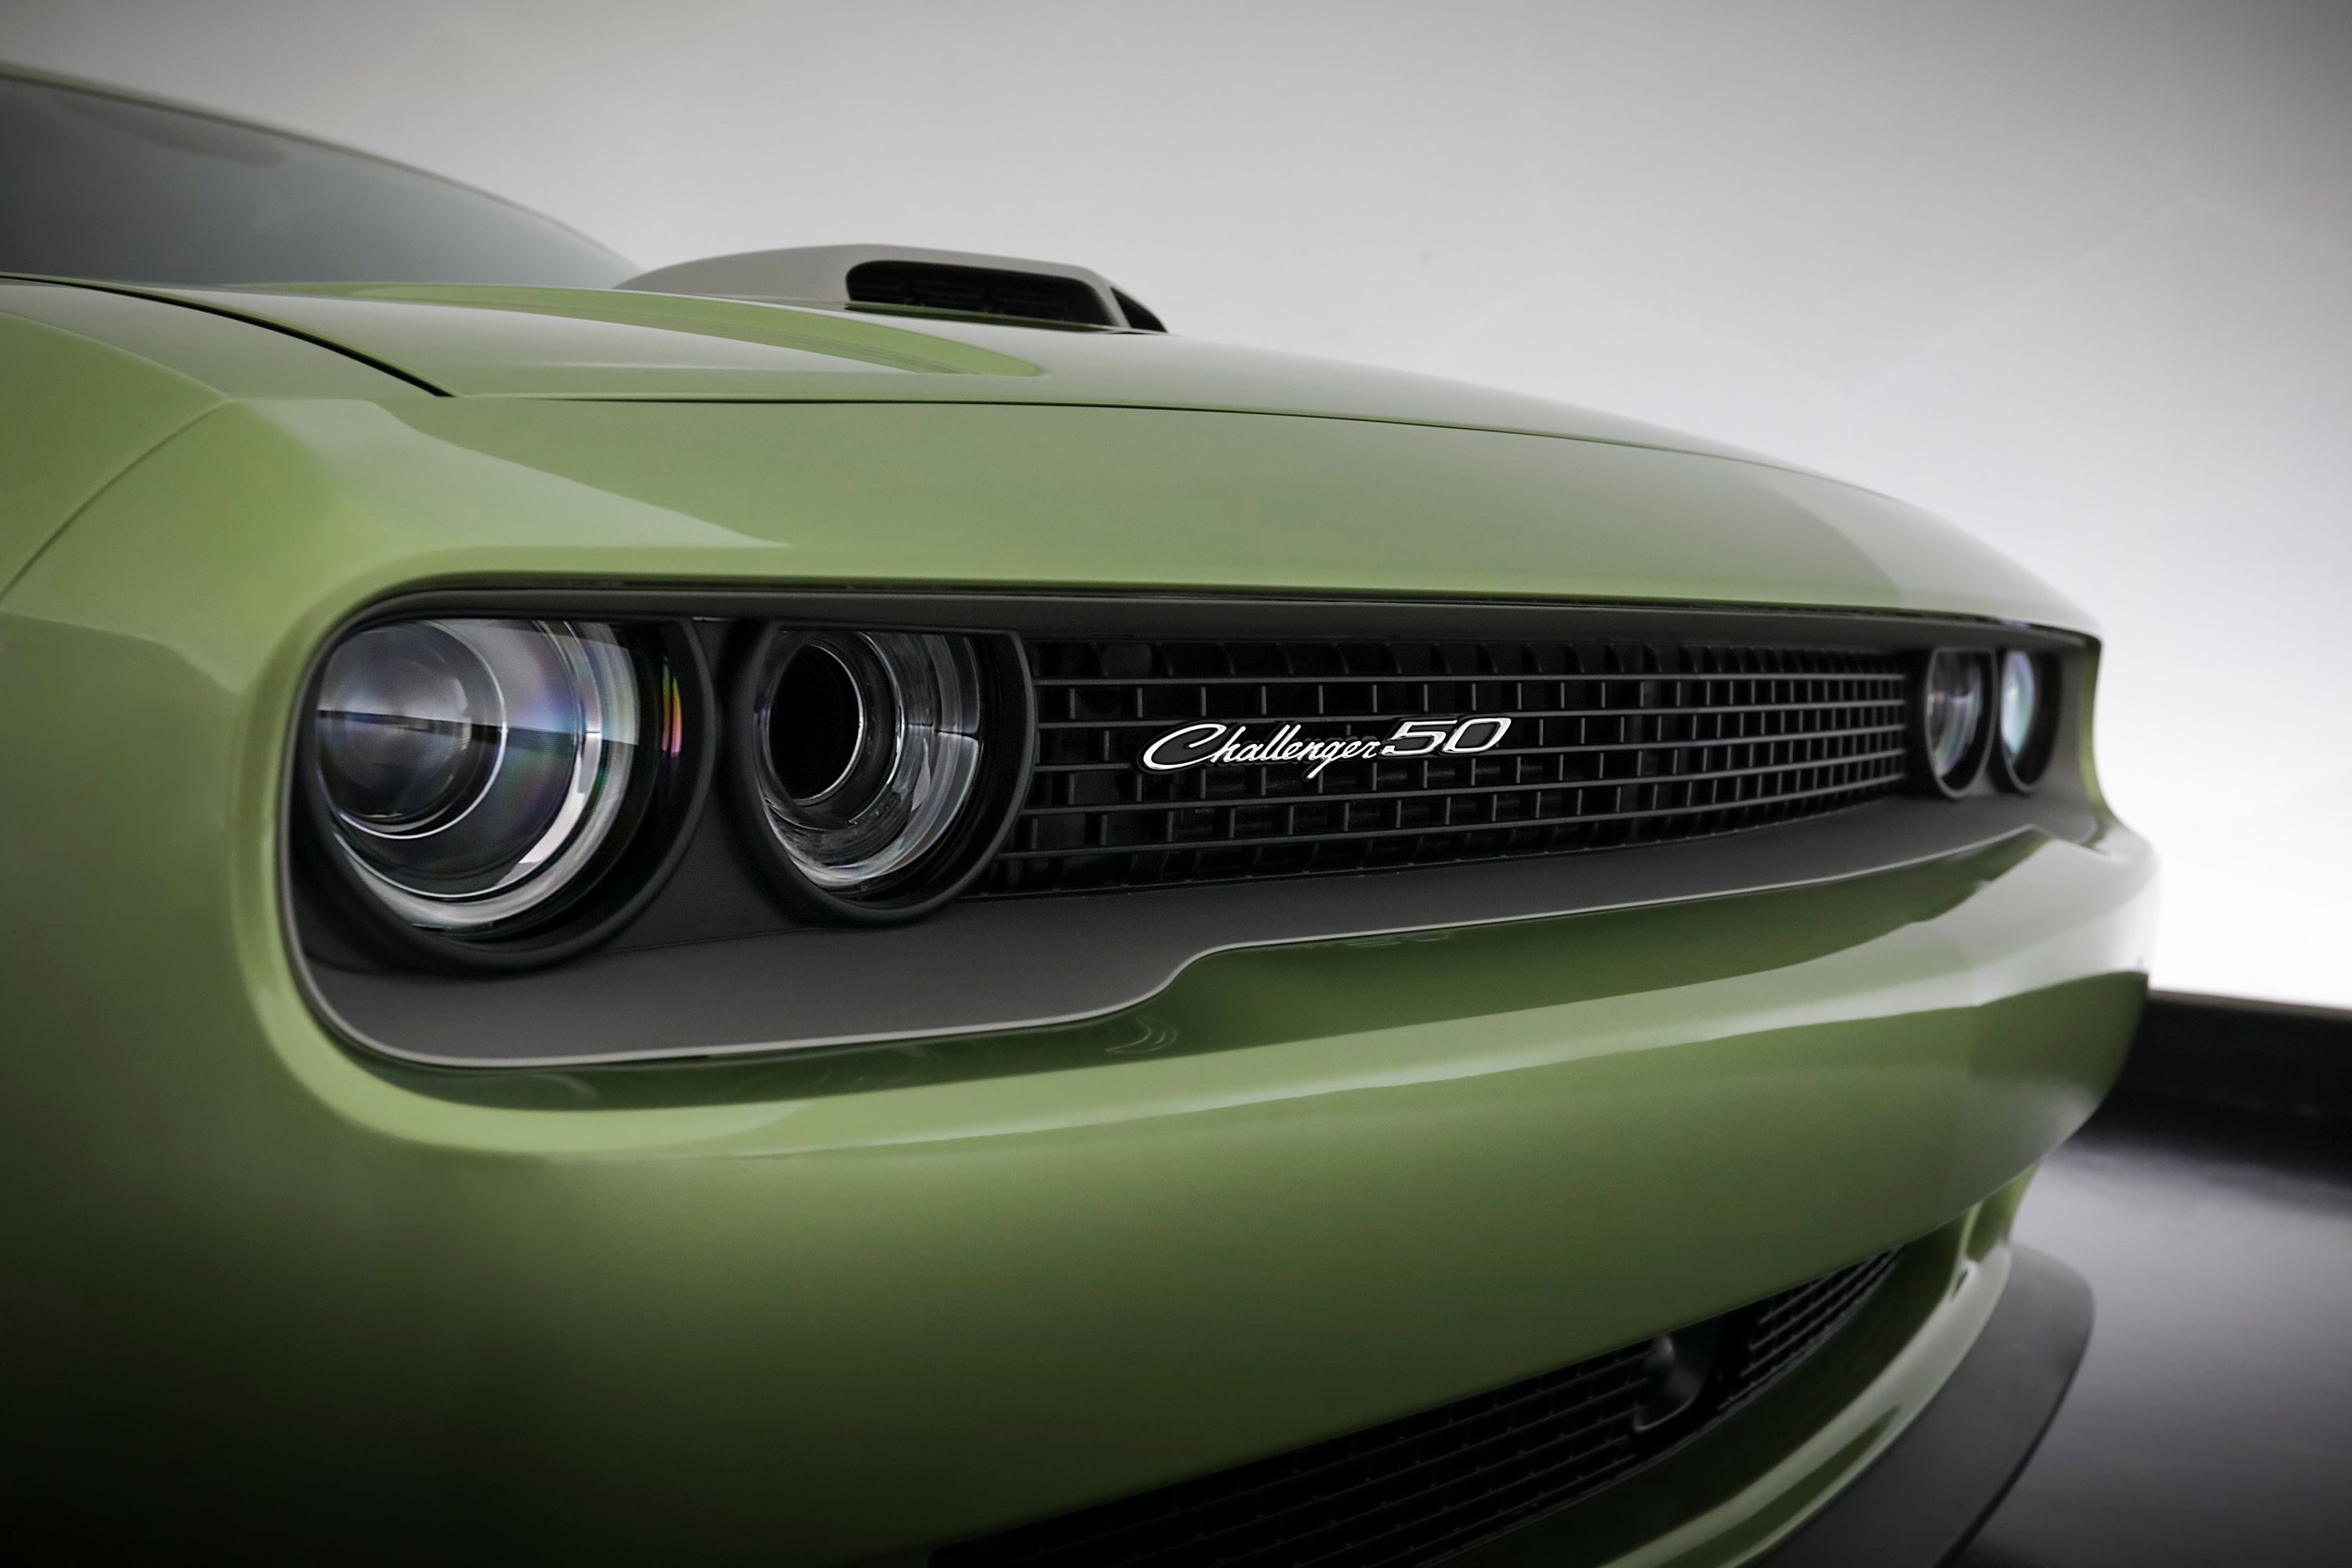 2021 Dodge Challenger Holy Guacamole Concept